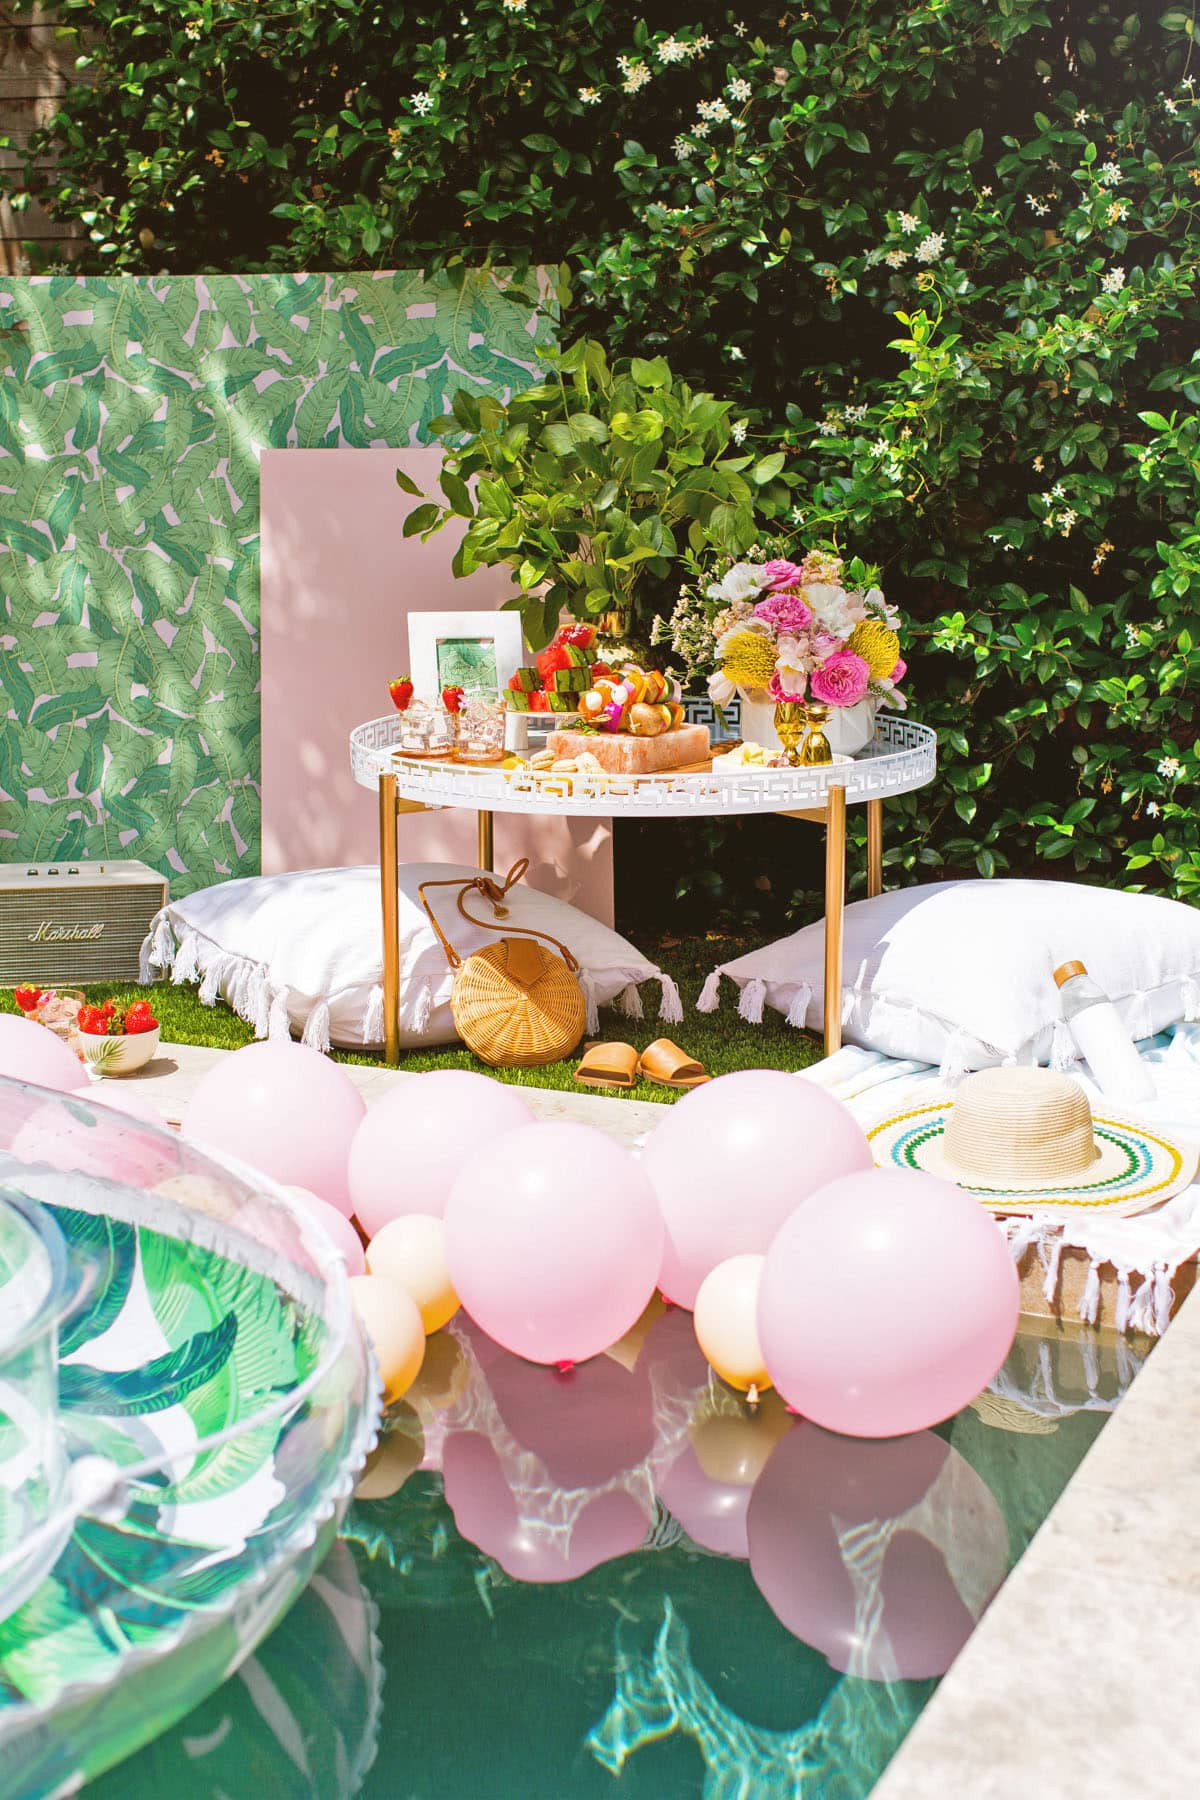 Pool Party Decorations Ideas
 Luxe Poolside Entertaining